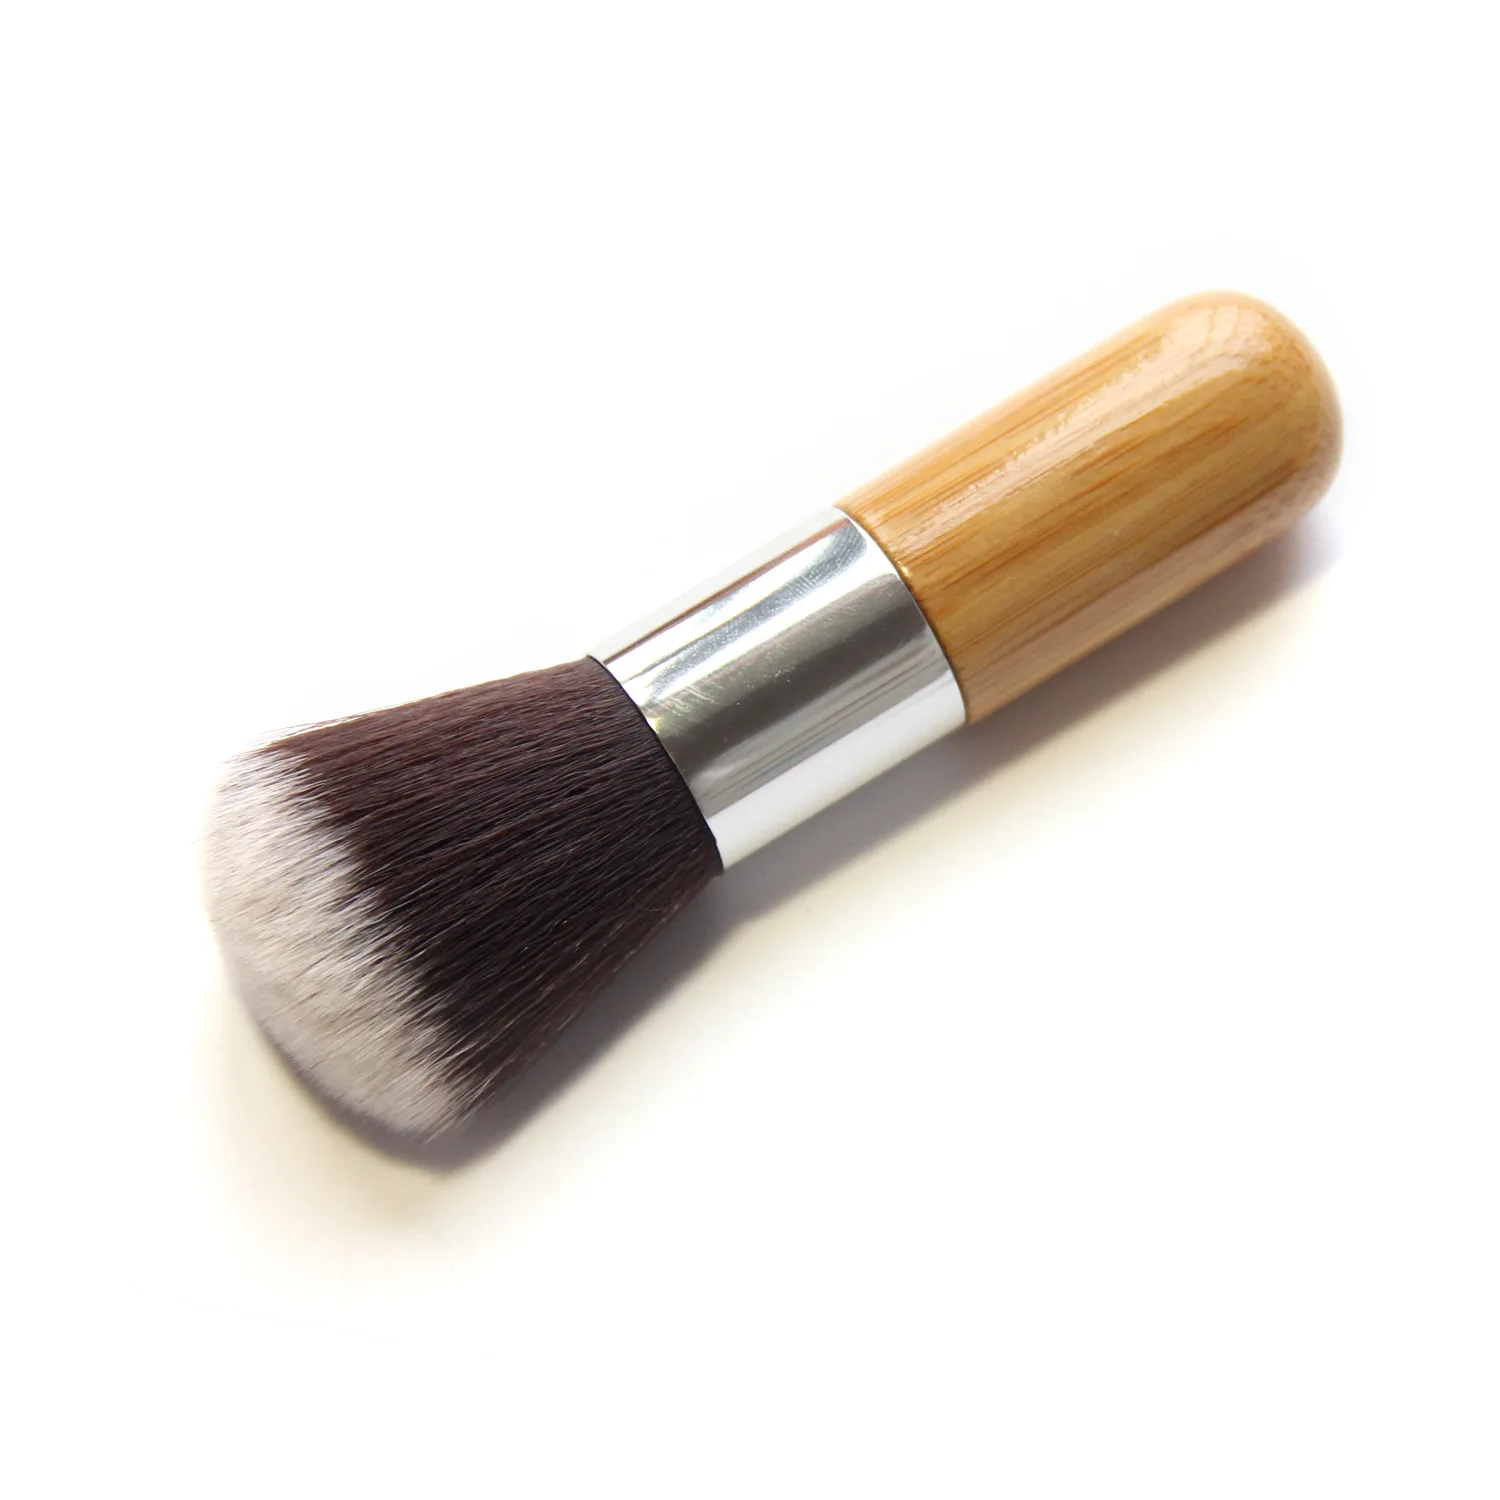 

Jieniya Bamboo Makeup Brush Face Foundation and Powder Makeup Brushes All in One, Brown